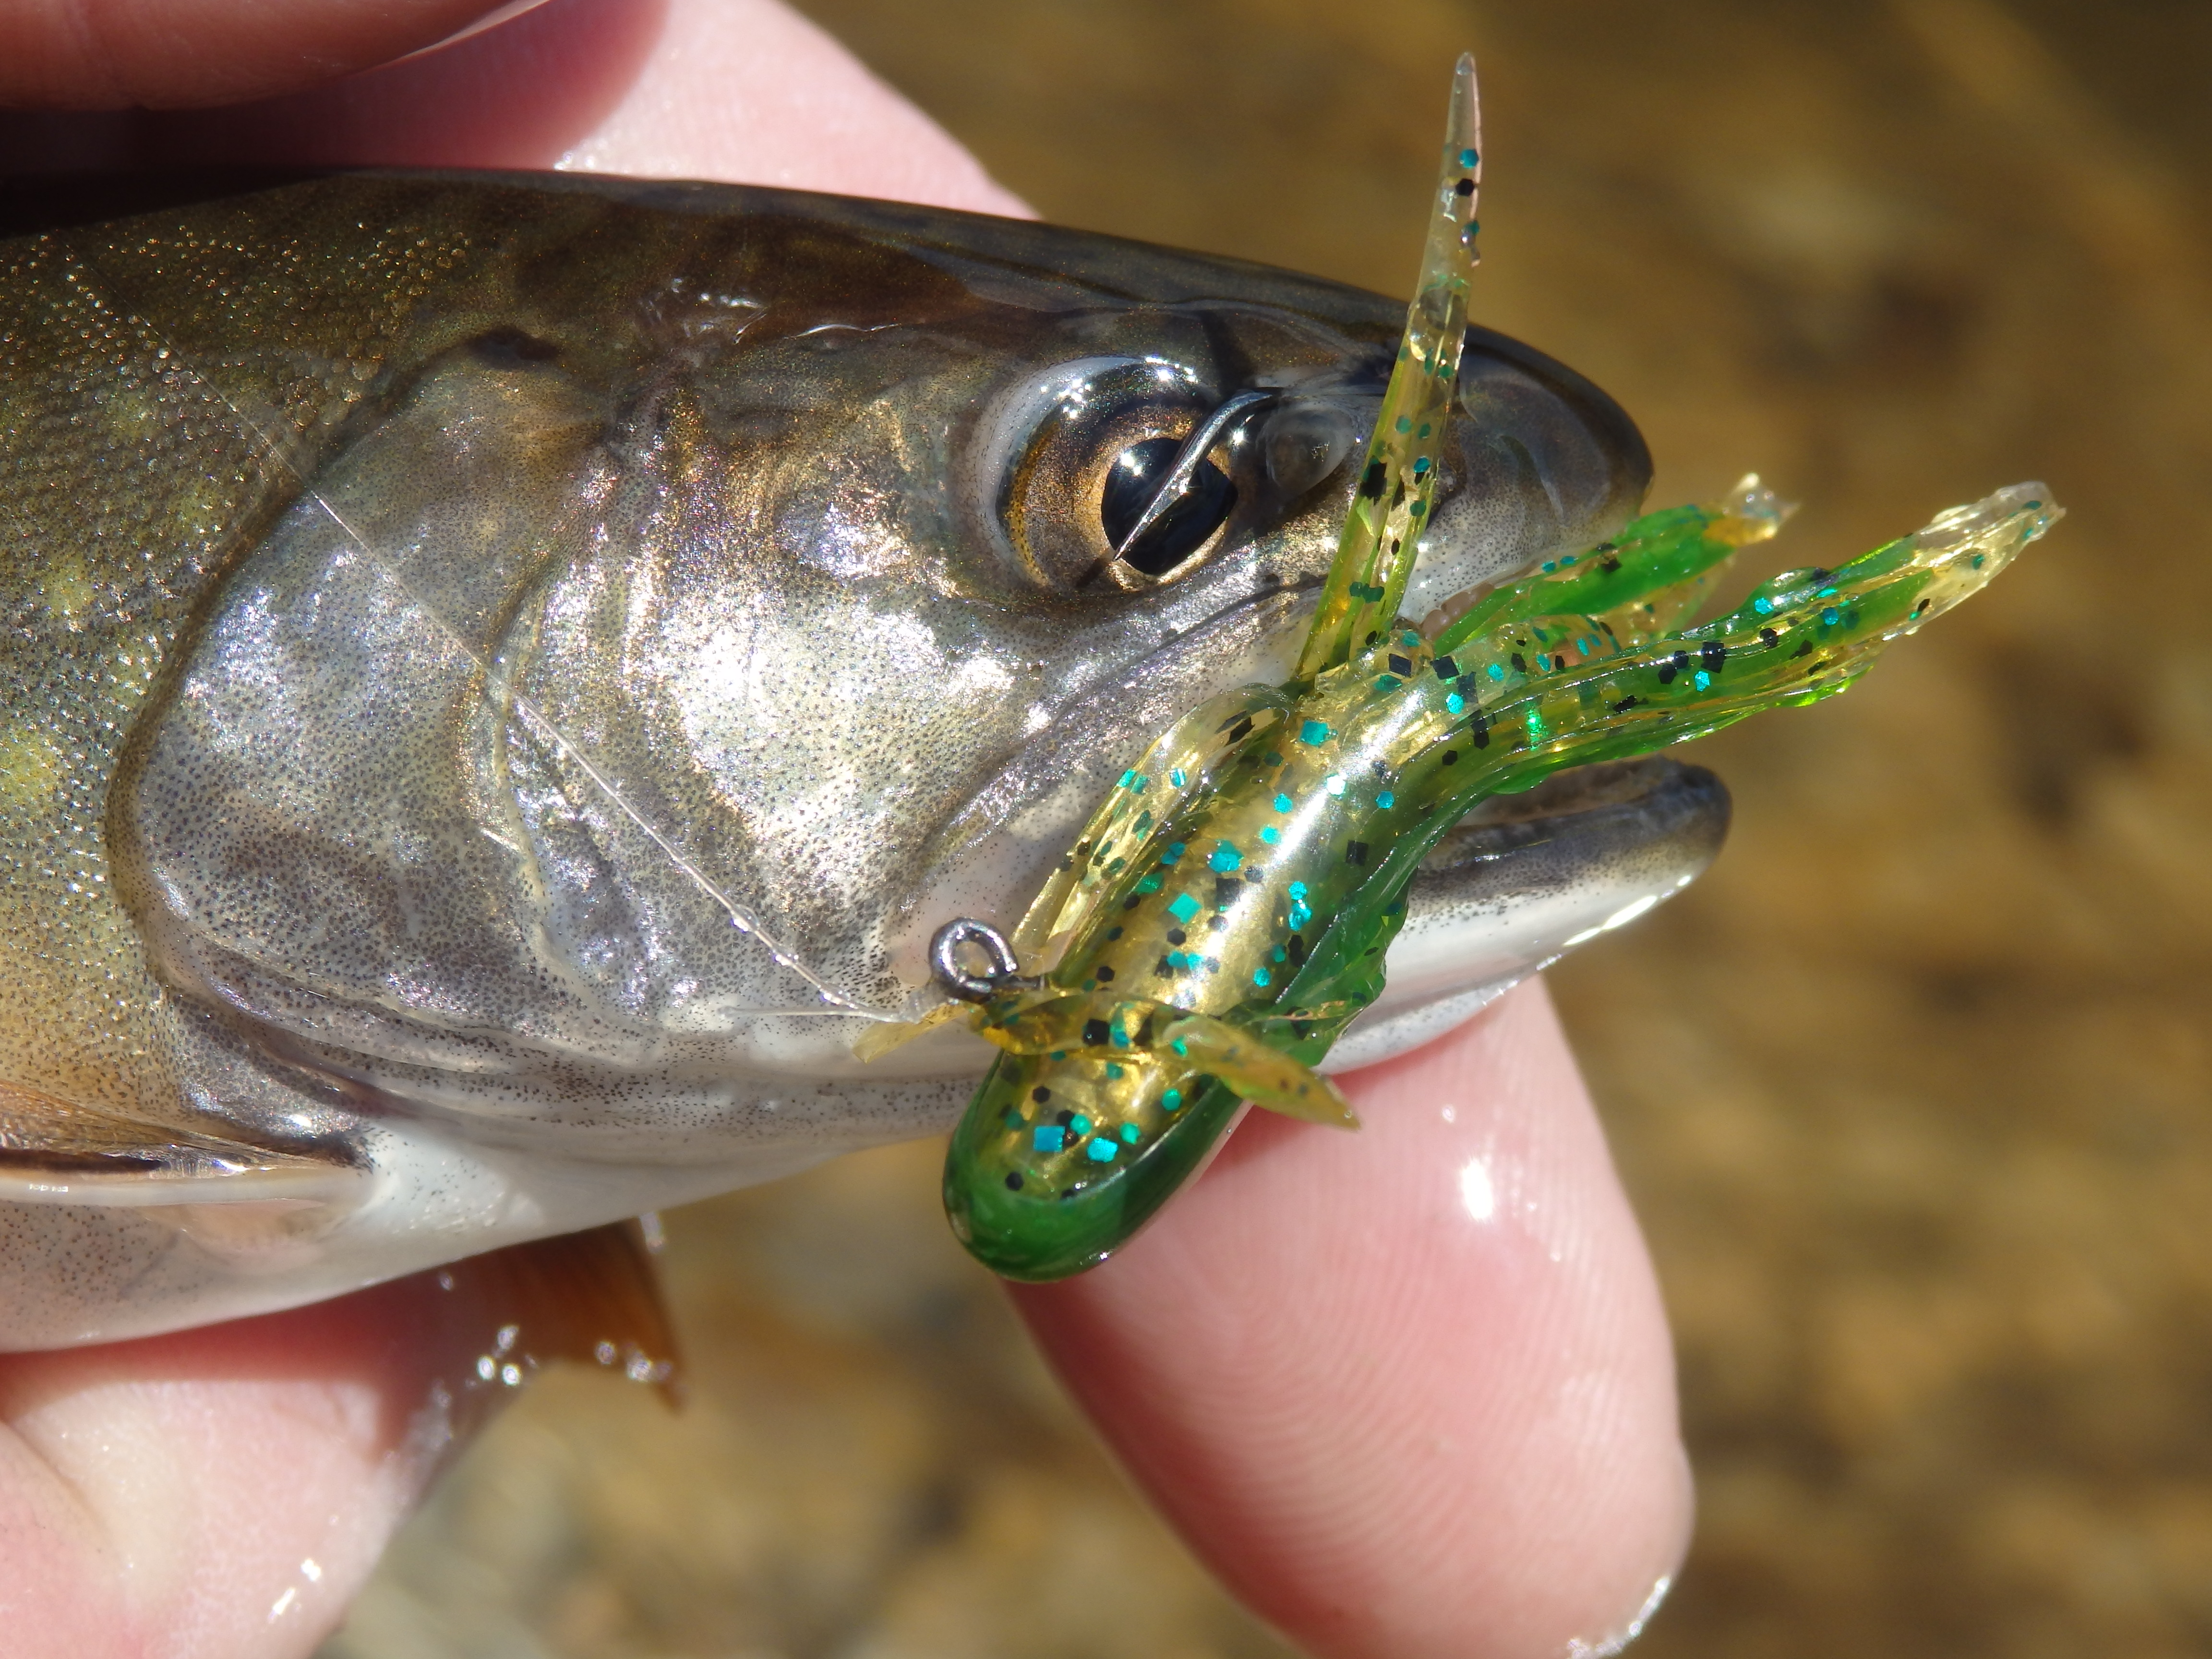 Take off your truck-trout training wheels and chase brookies